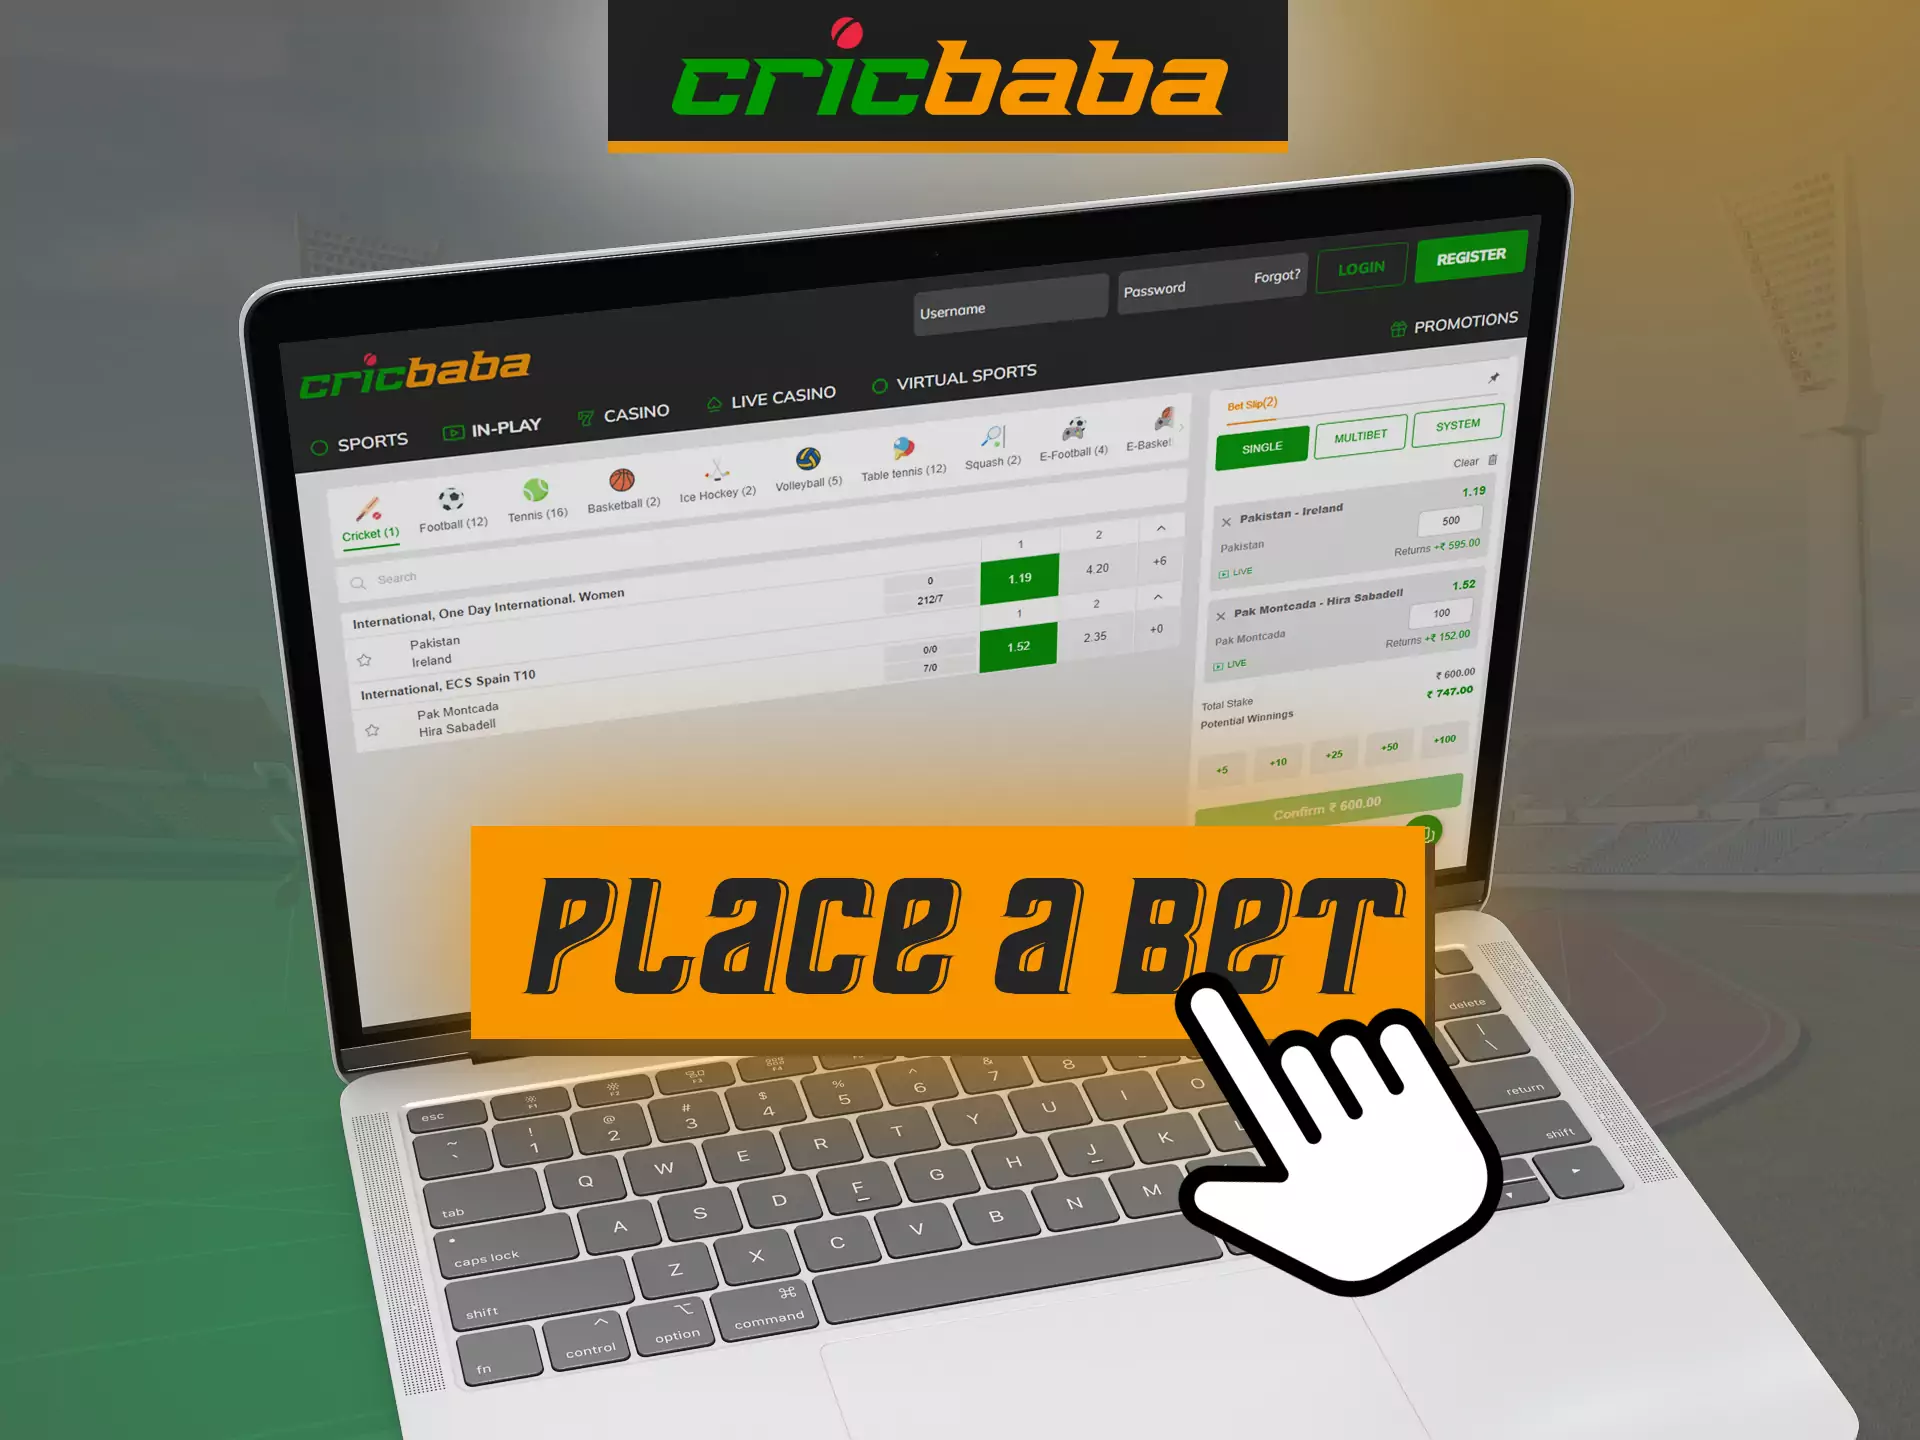 It is easy to place bets in Cricbaba and play with pleasure, read the instructions.